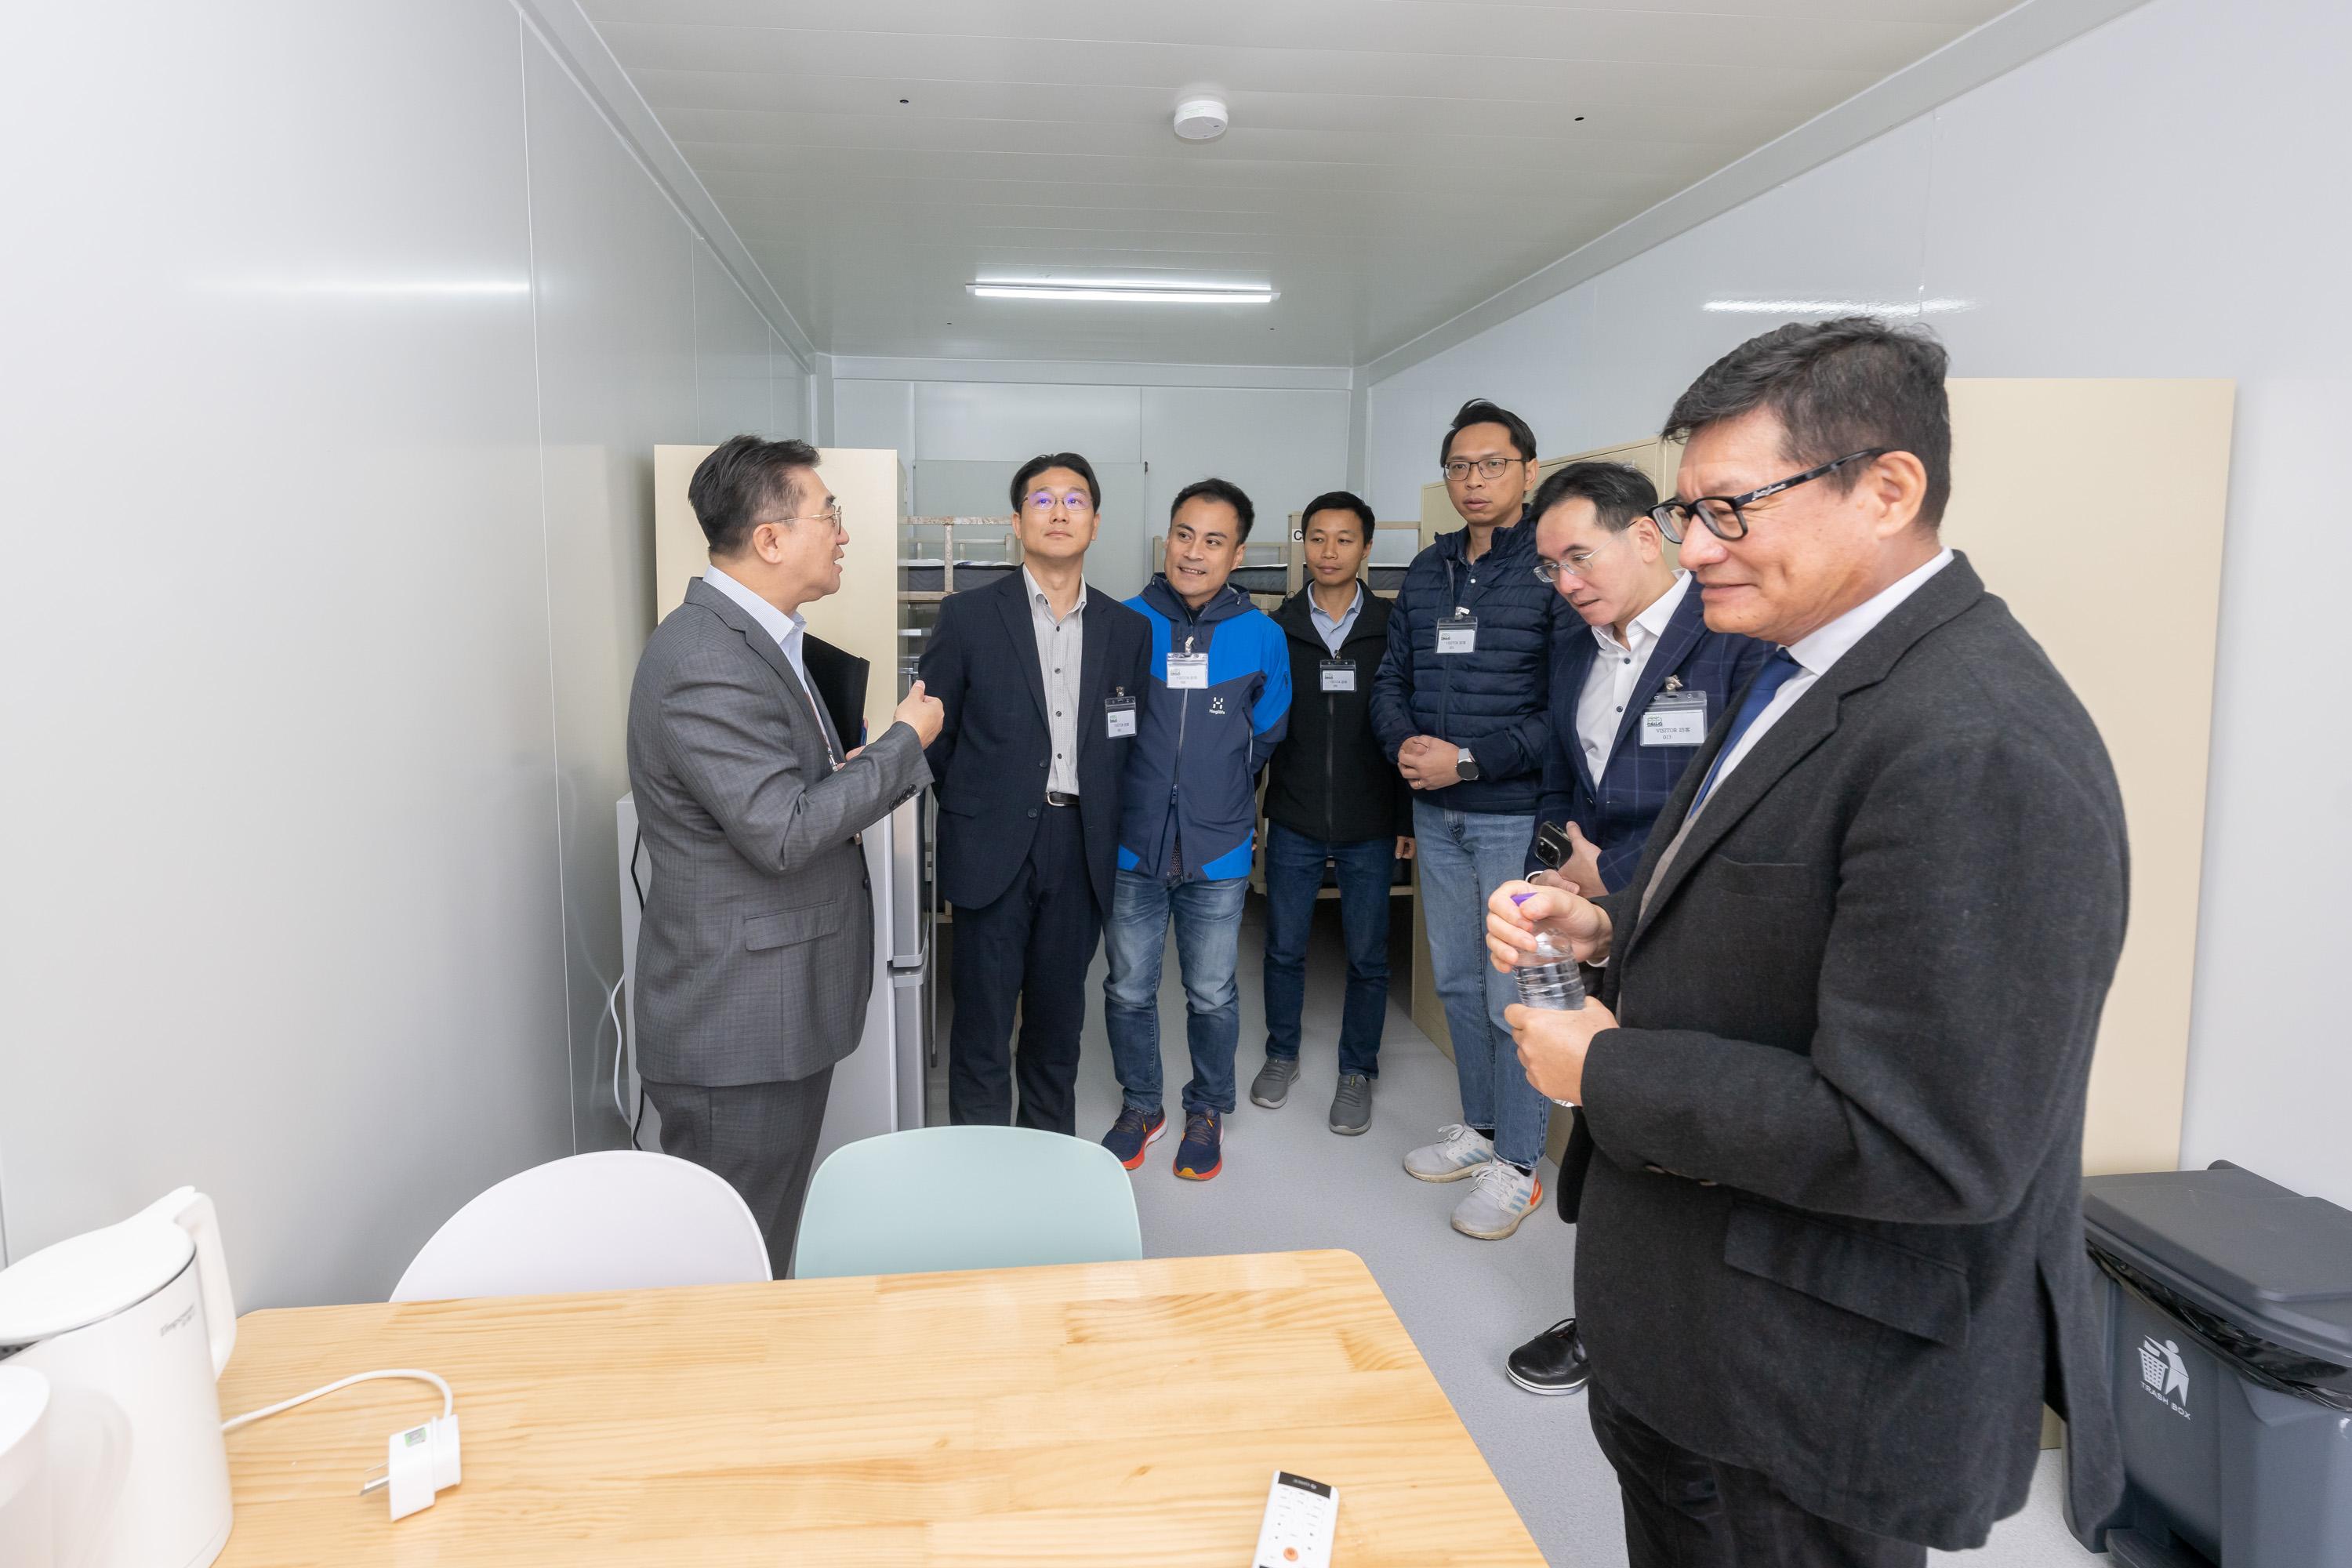 The Legislative Council Panel on Manpower visited the Construction Sector Imported Labour Quarters in Tam Mi, Yuen Long, today (December 19). Photo shows Members observing a dormitory unit in the Quarters.